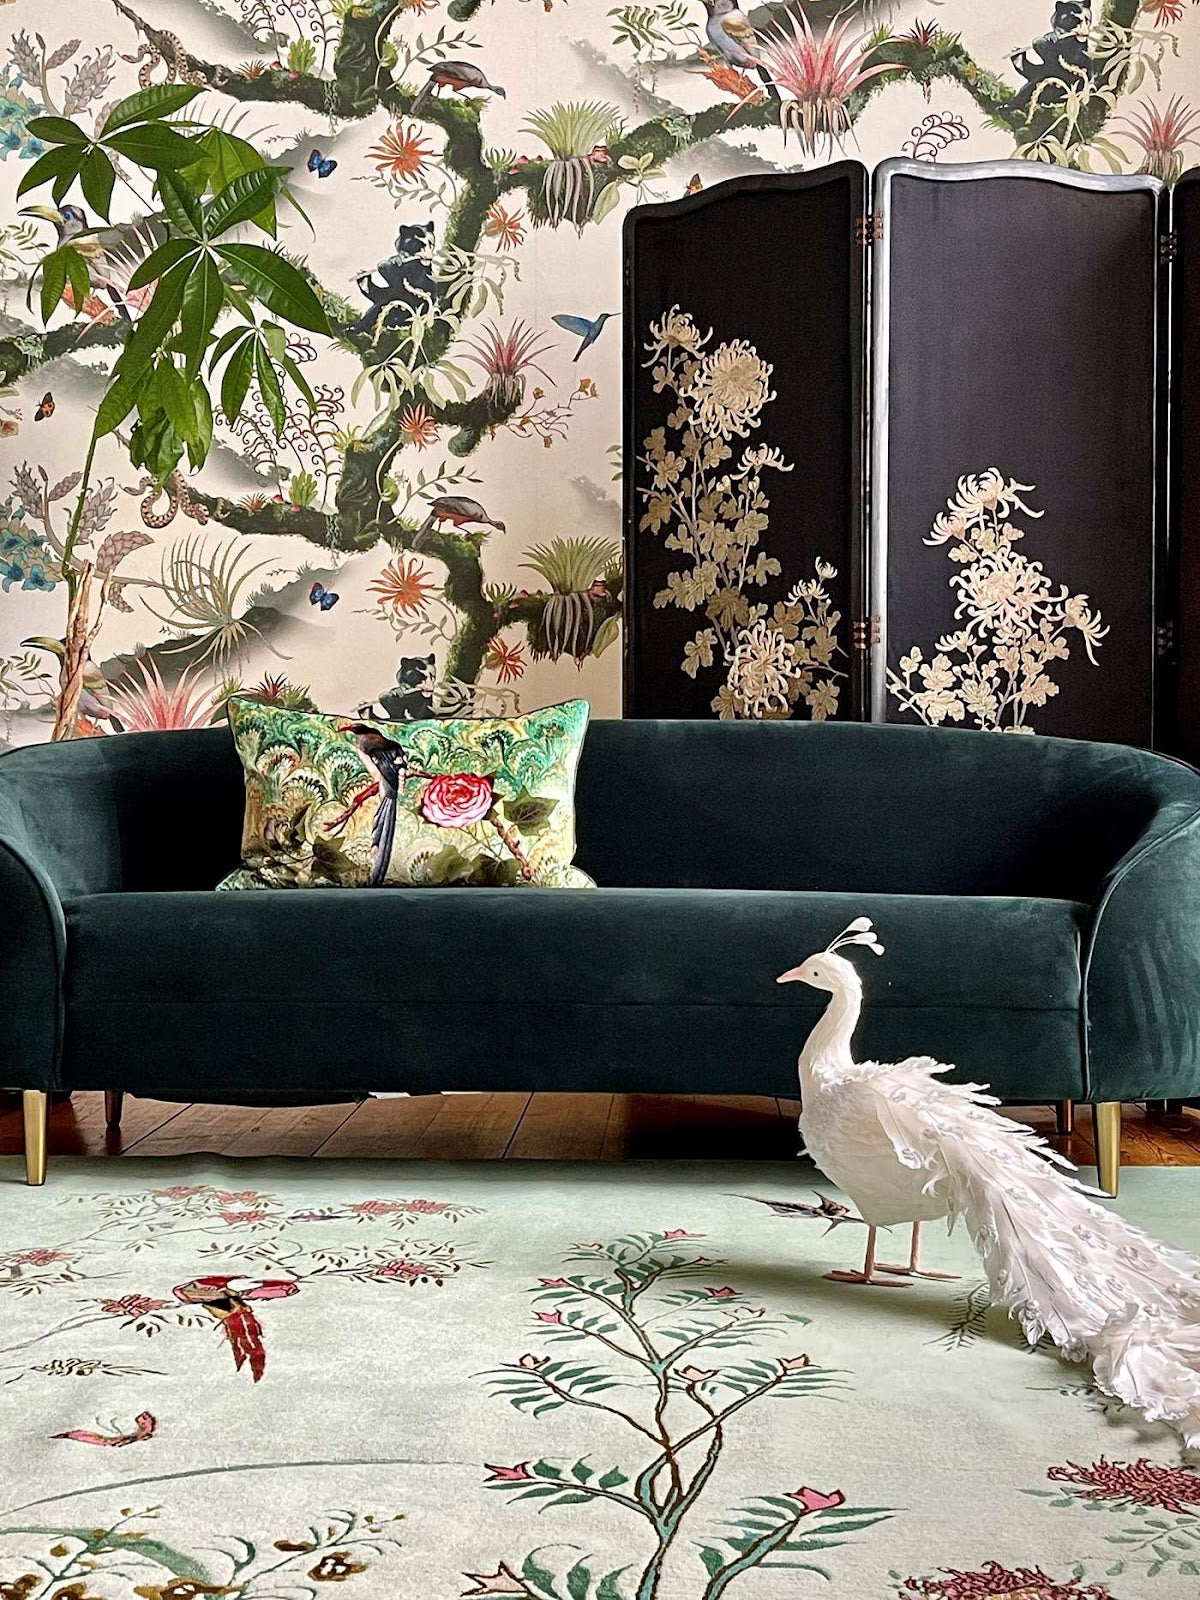 In celebration of Art Deco style and Chinoiserie design – Wendy